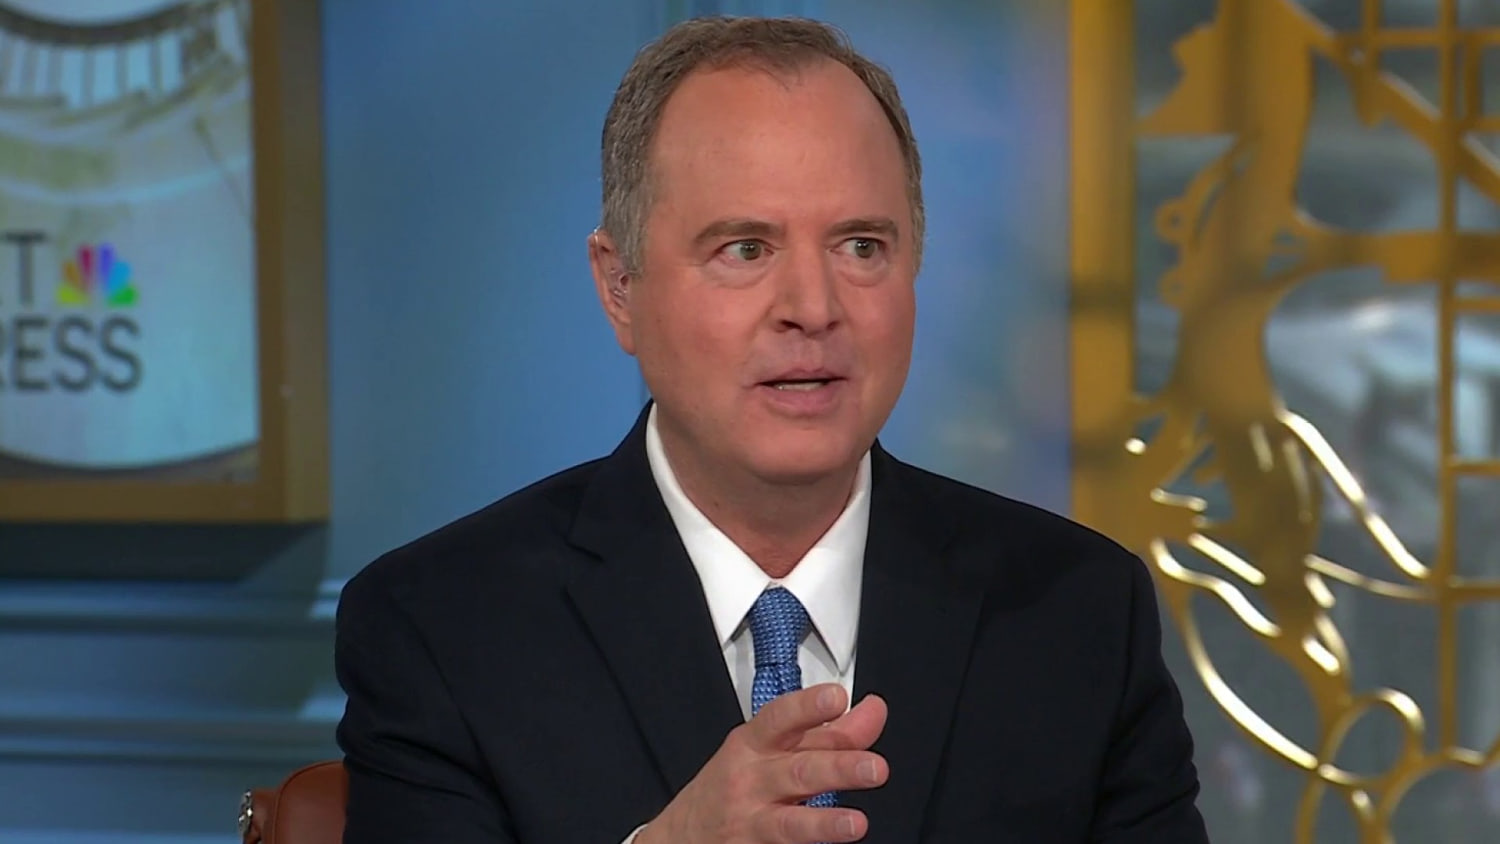 Rep. Schiff says Biden’s comments about losing to Trump ‘concerned' him